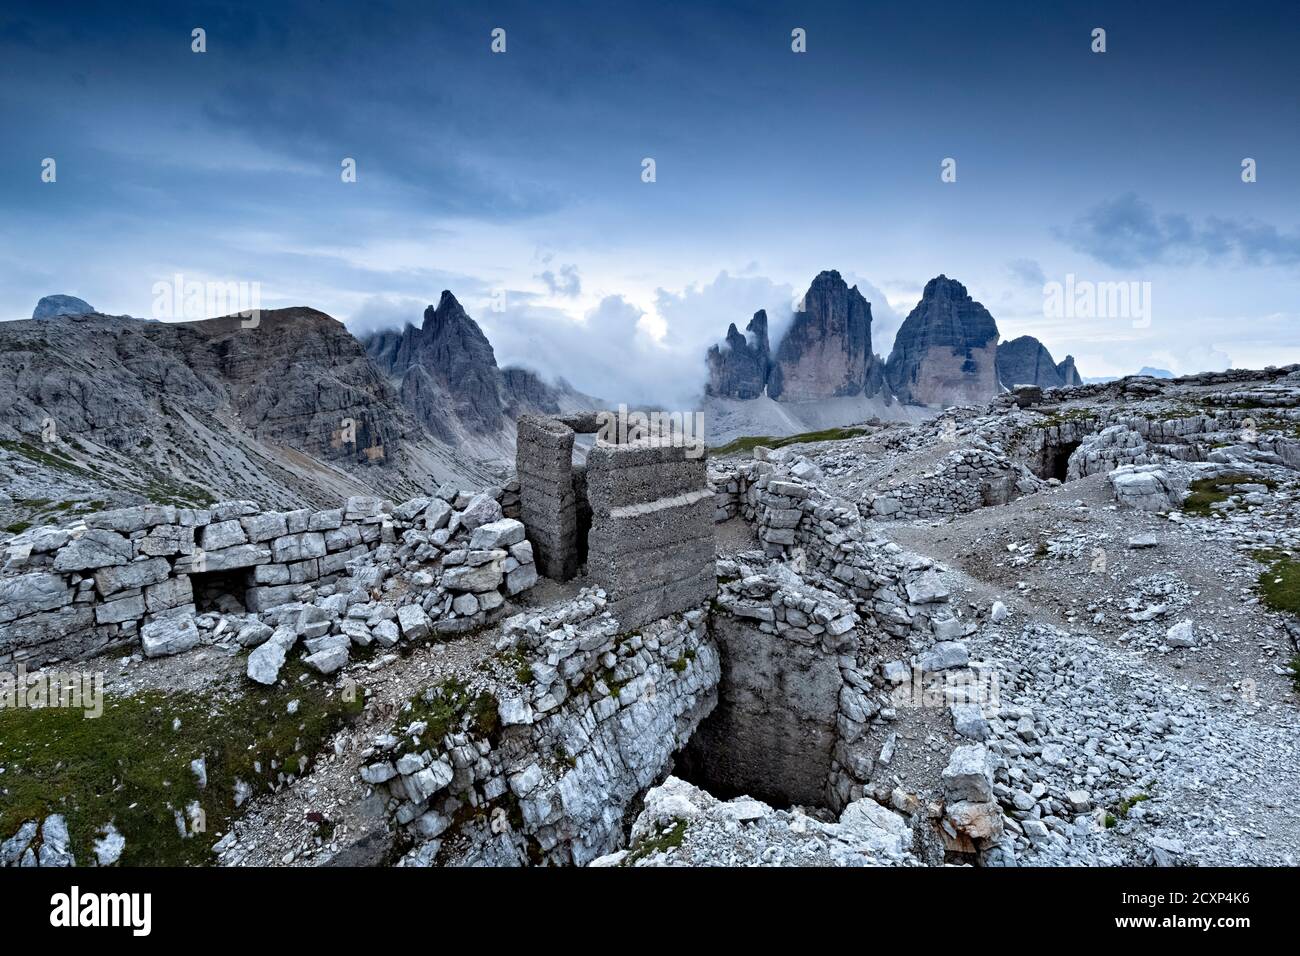 The 'Kuppe Est' stronghold of the Great War. In the background the Tre Cime di Lavaredo. Sesto Dolomites, Bolzano province, Italy. Stock Photo